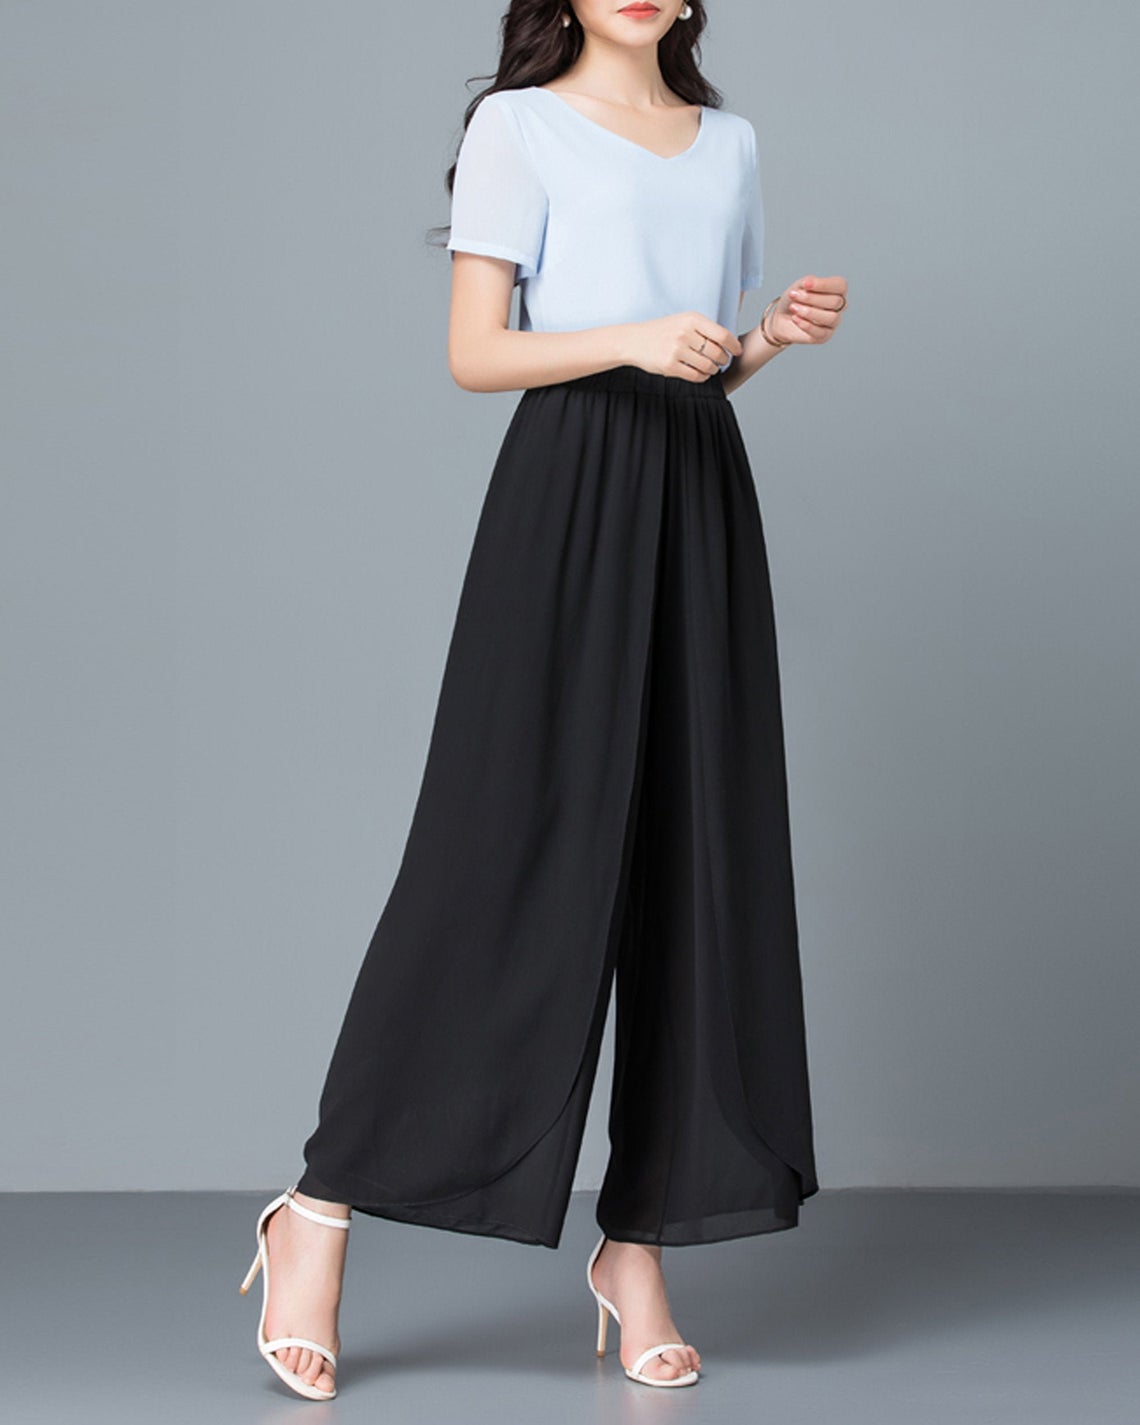 Stylish Yanueun Bow Ankle Length Loose Palazzo Pants With Top For